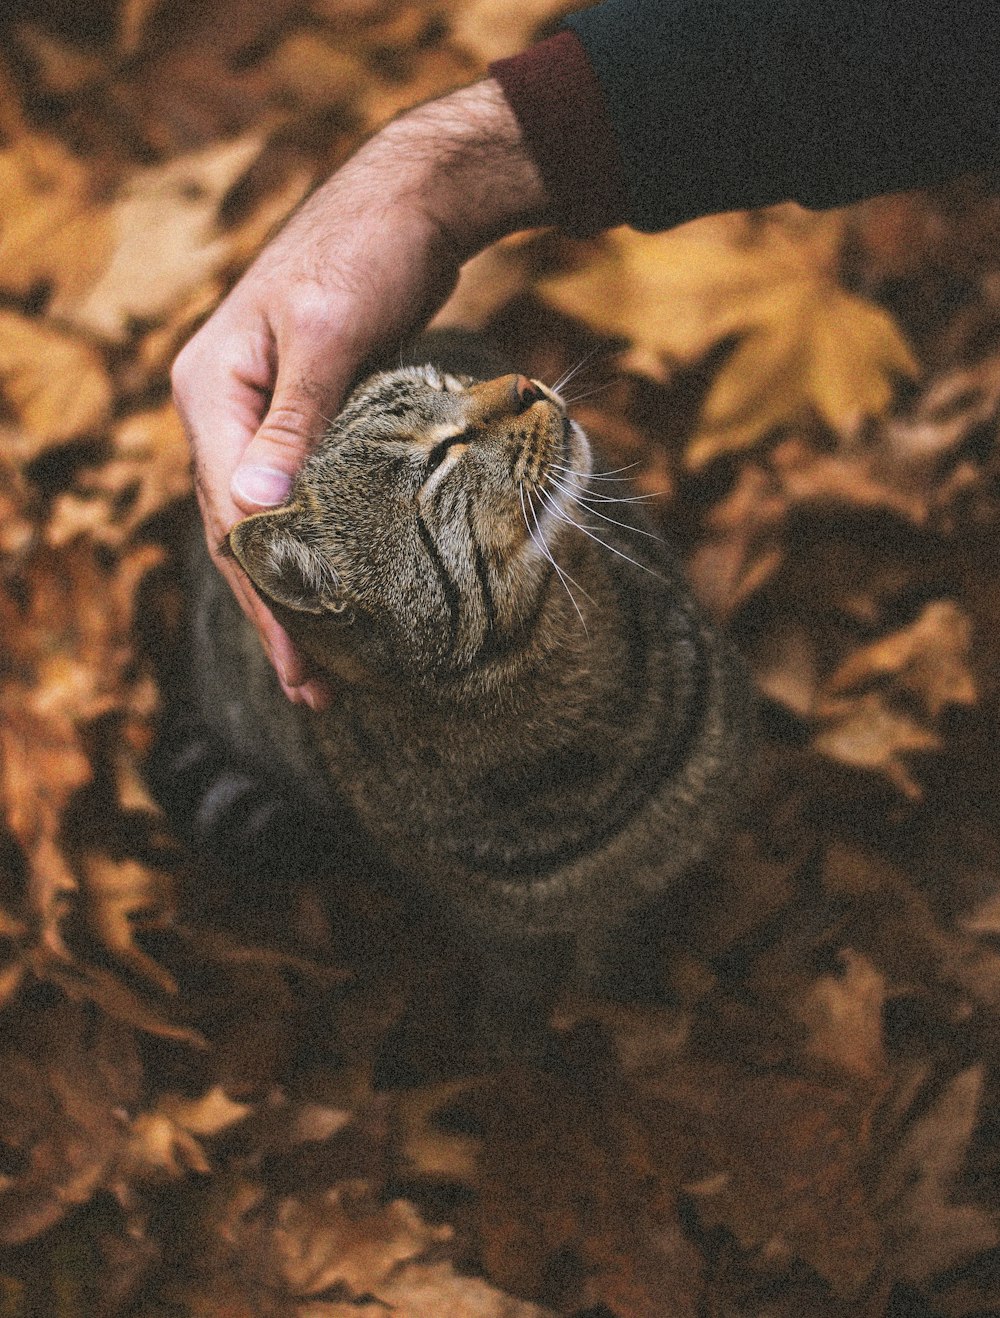 brown tabby cat on persons hand